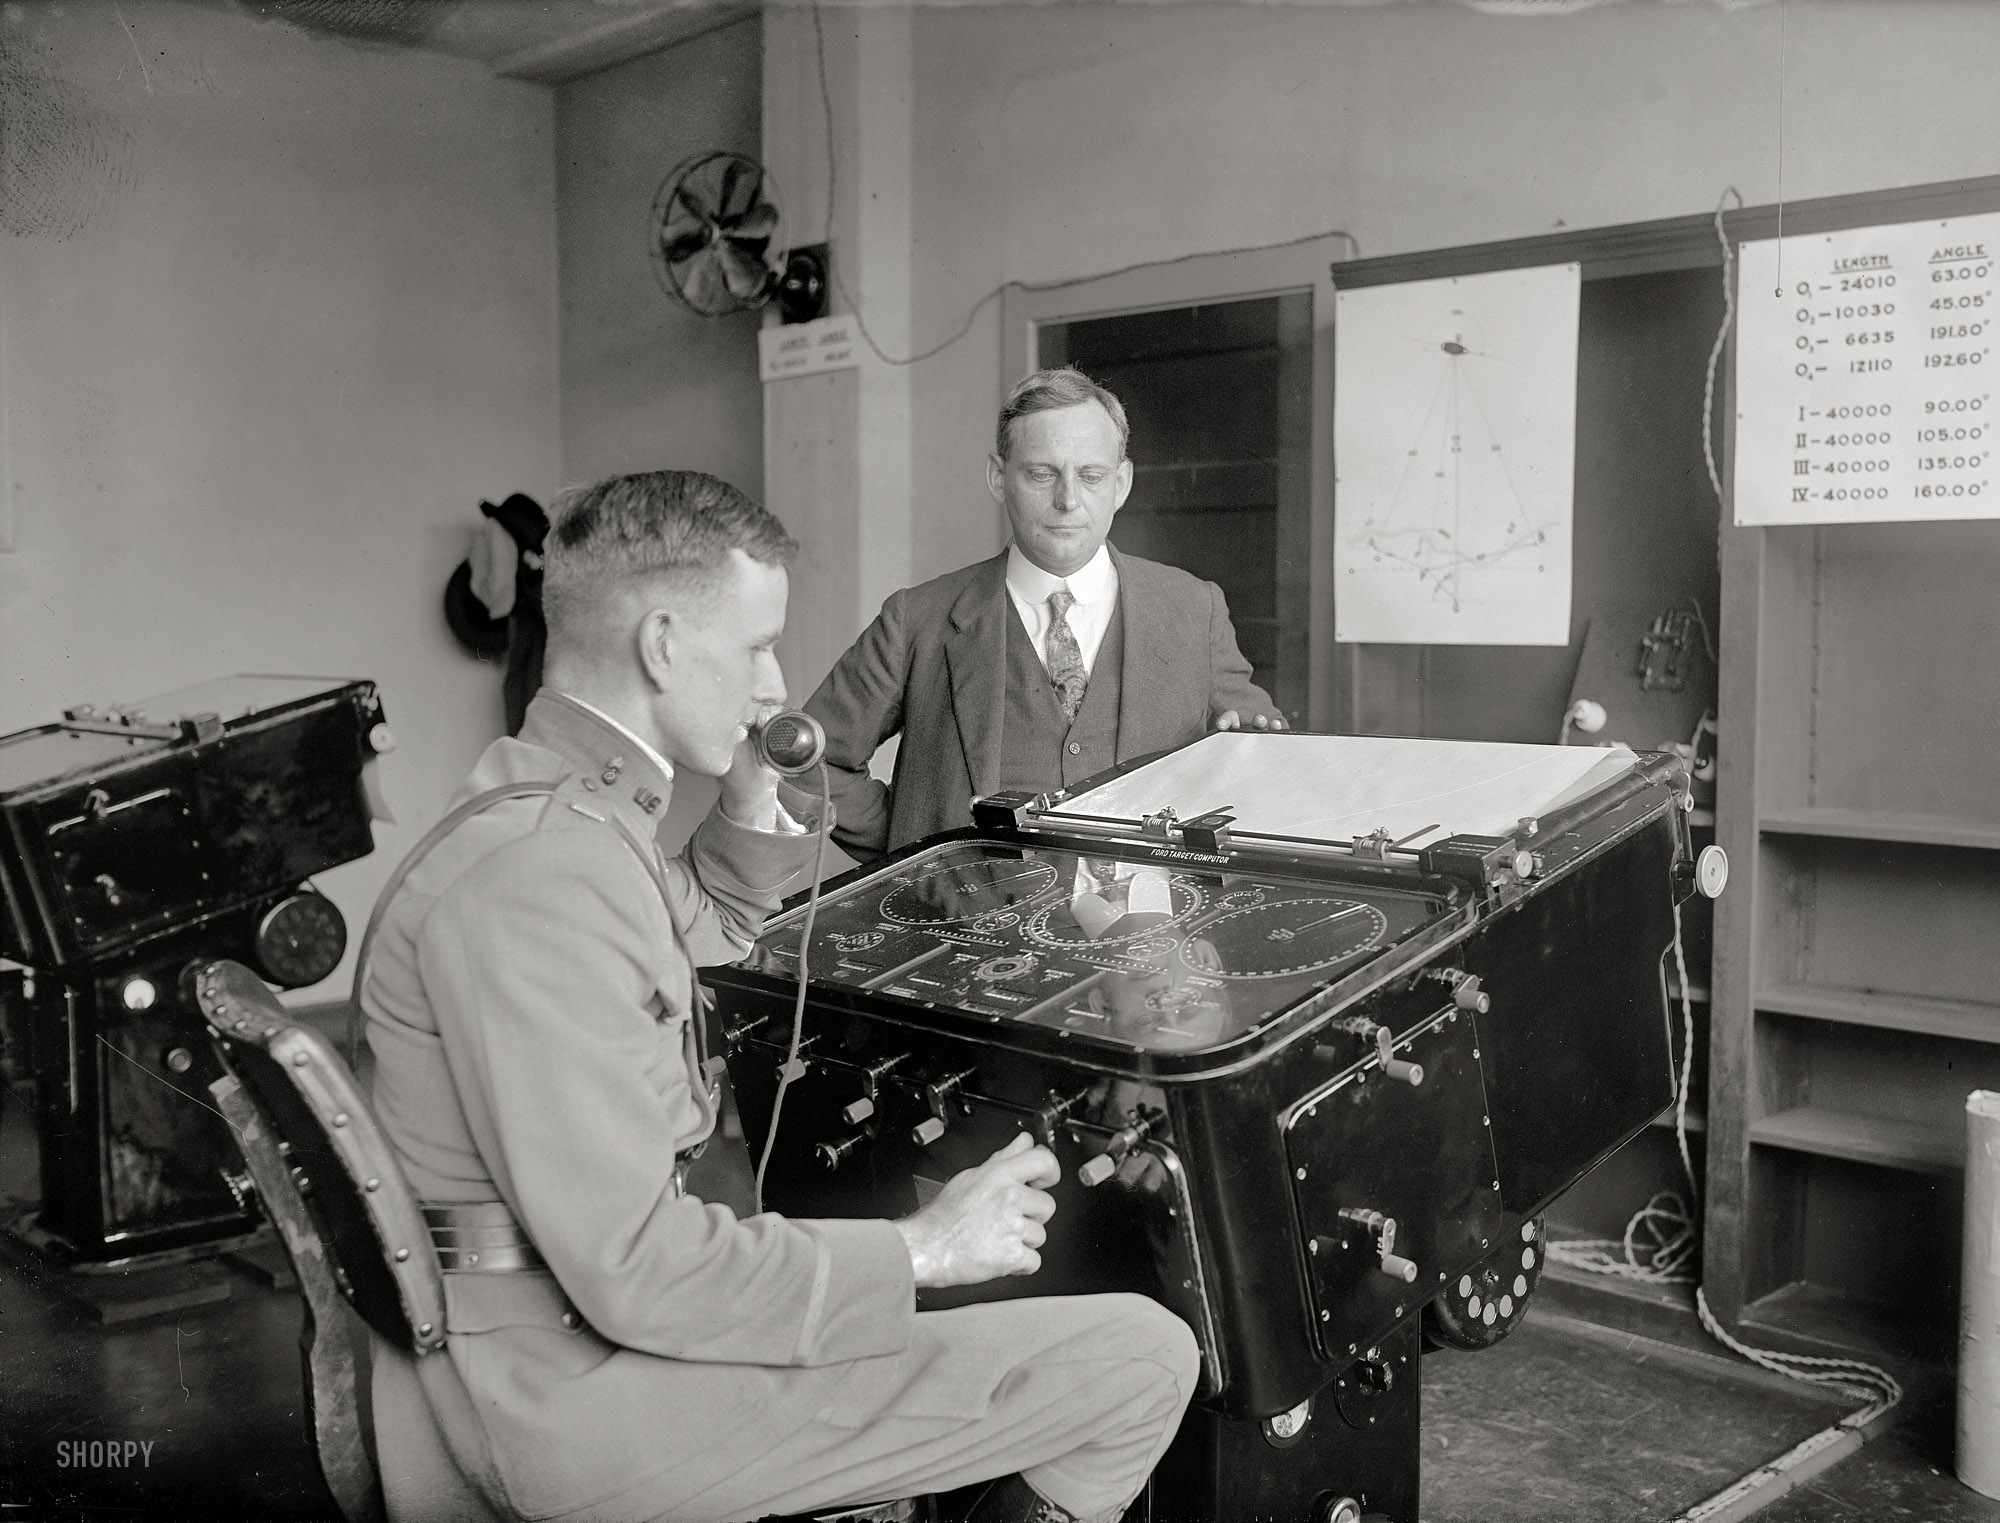 October 2, 1922. Washington, D.C. "Ford Target Computor. Capt. H.E. Ely." An electro-mechanical approach to the aiming of large artillery pieces. National Photo Company Collection glass negative. View full size.